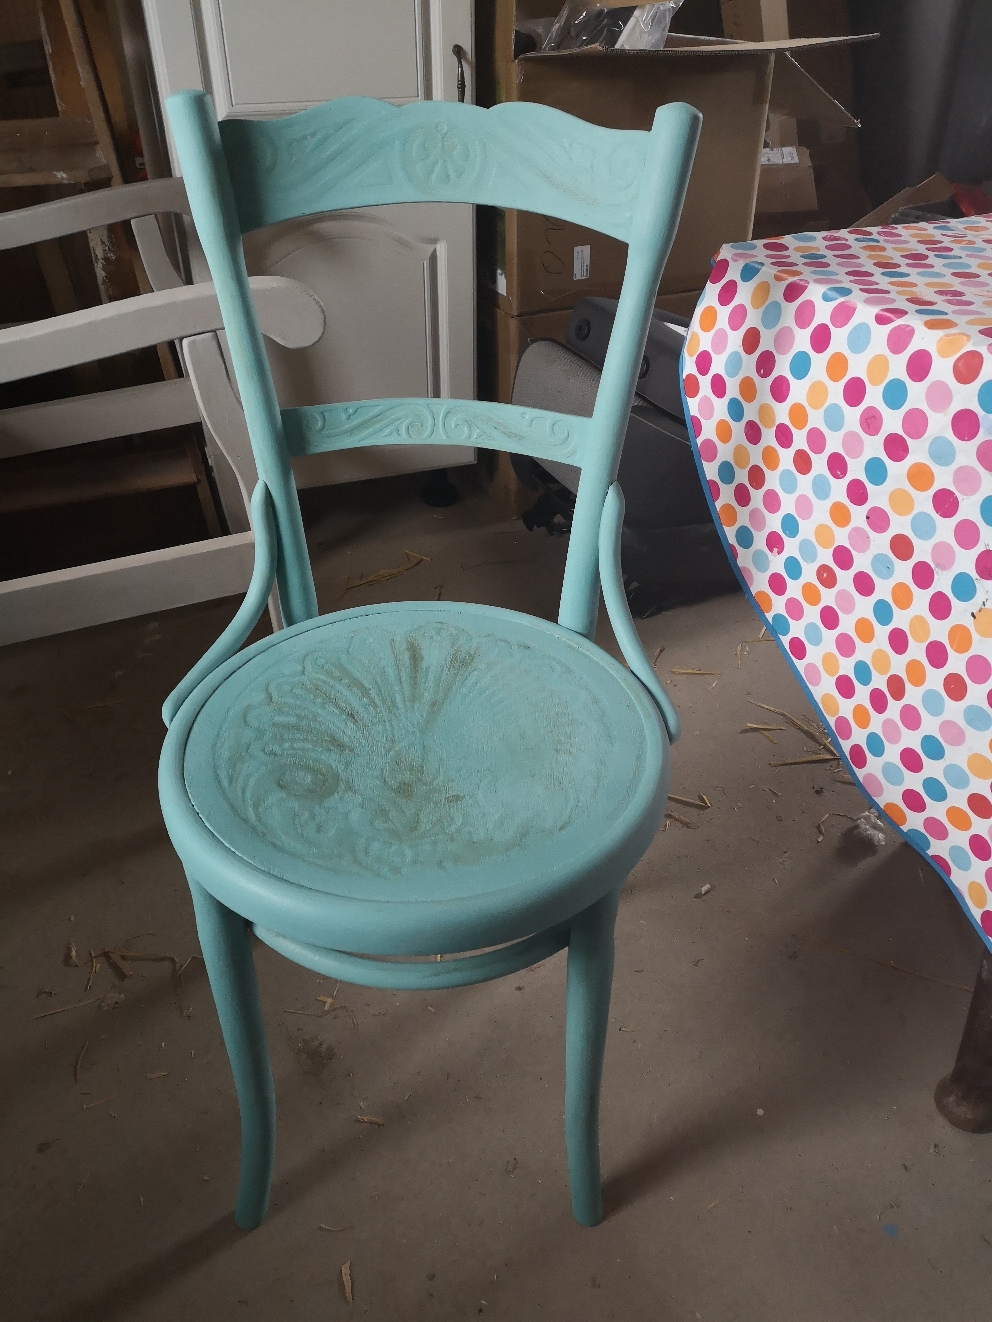 Nachher. Farbe Annie Sloan "Provence". Shabby Look mit dunklem Wachs